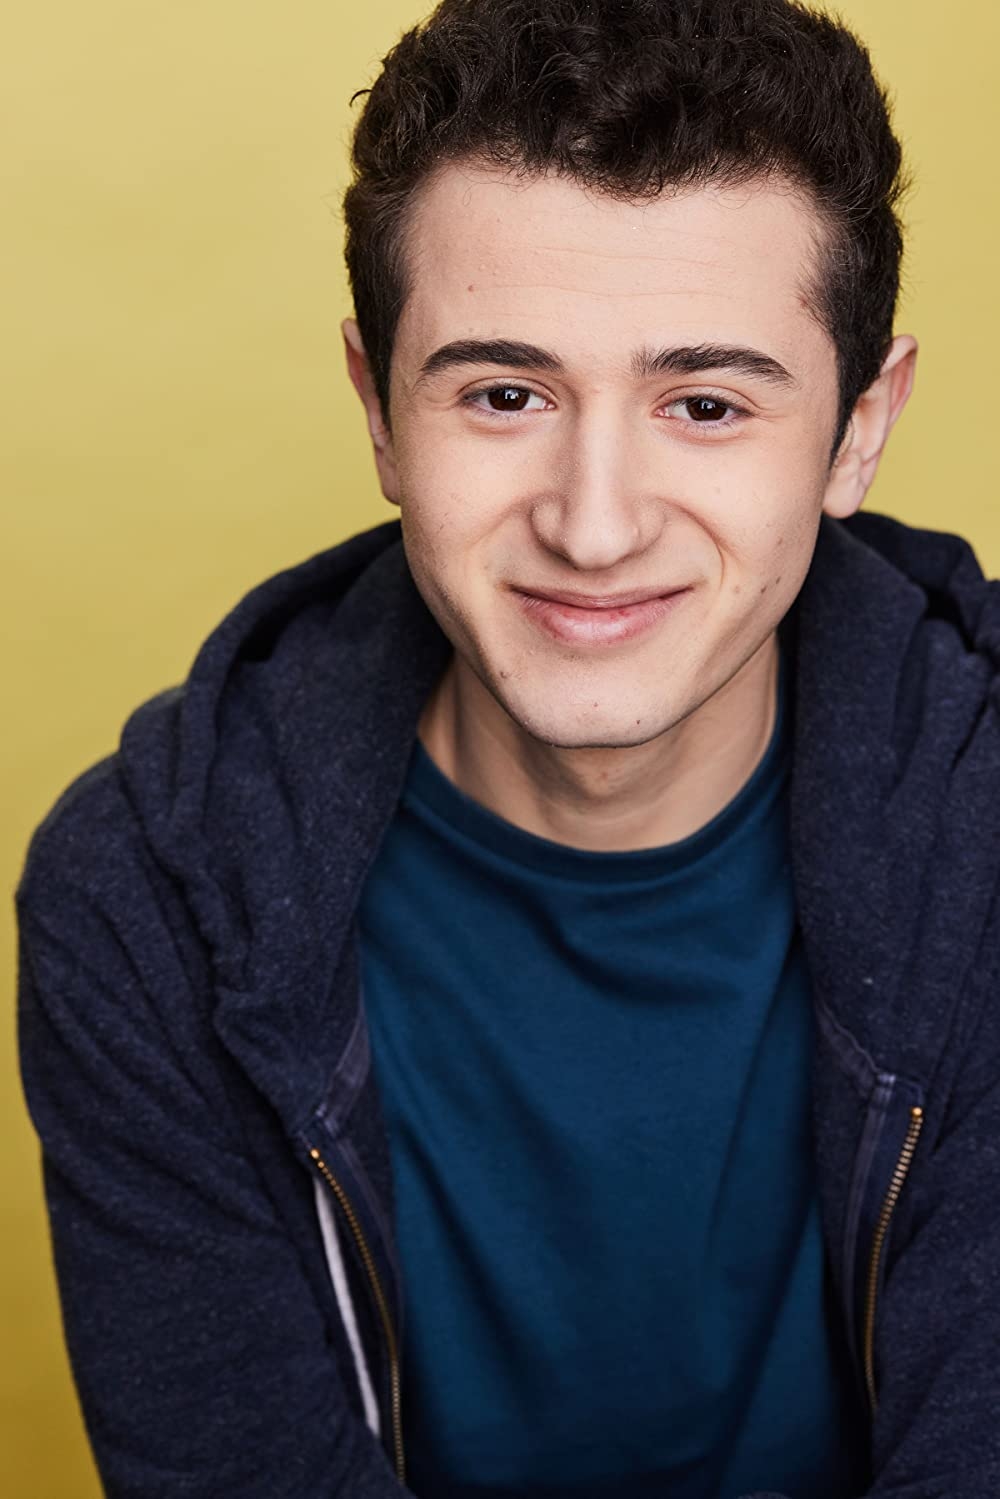 Headshot for actor and ASU student David Bloom